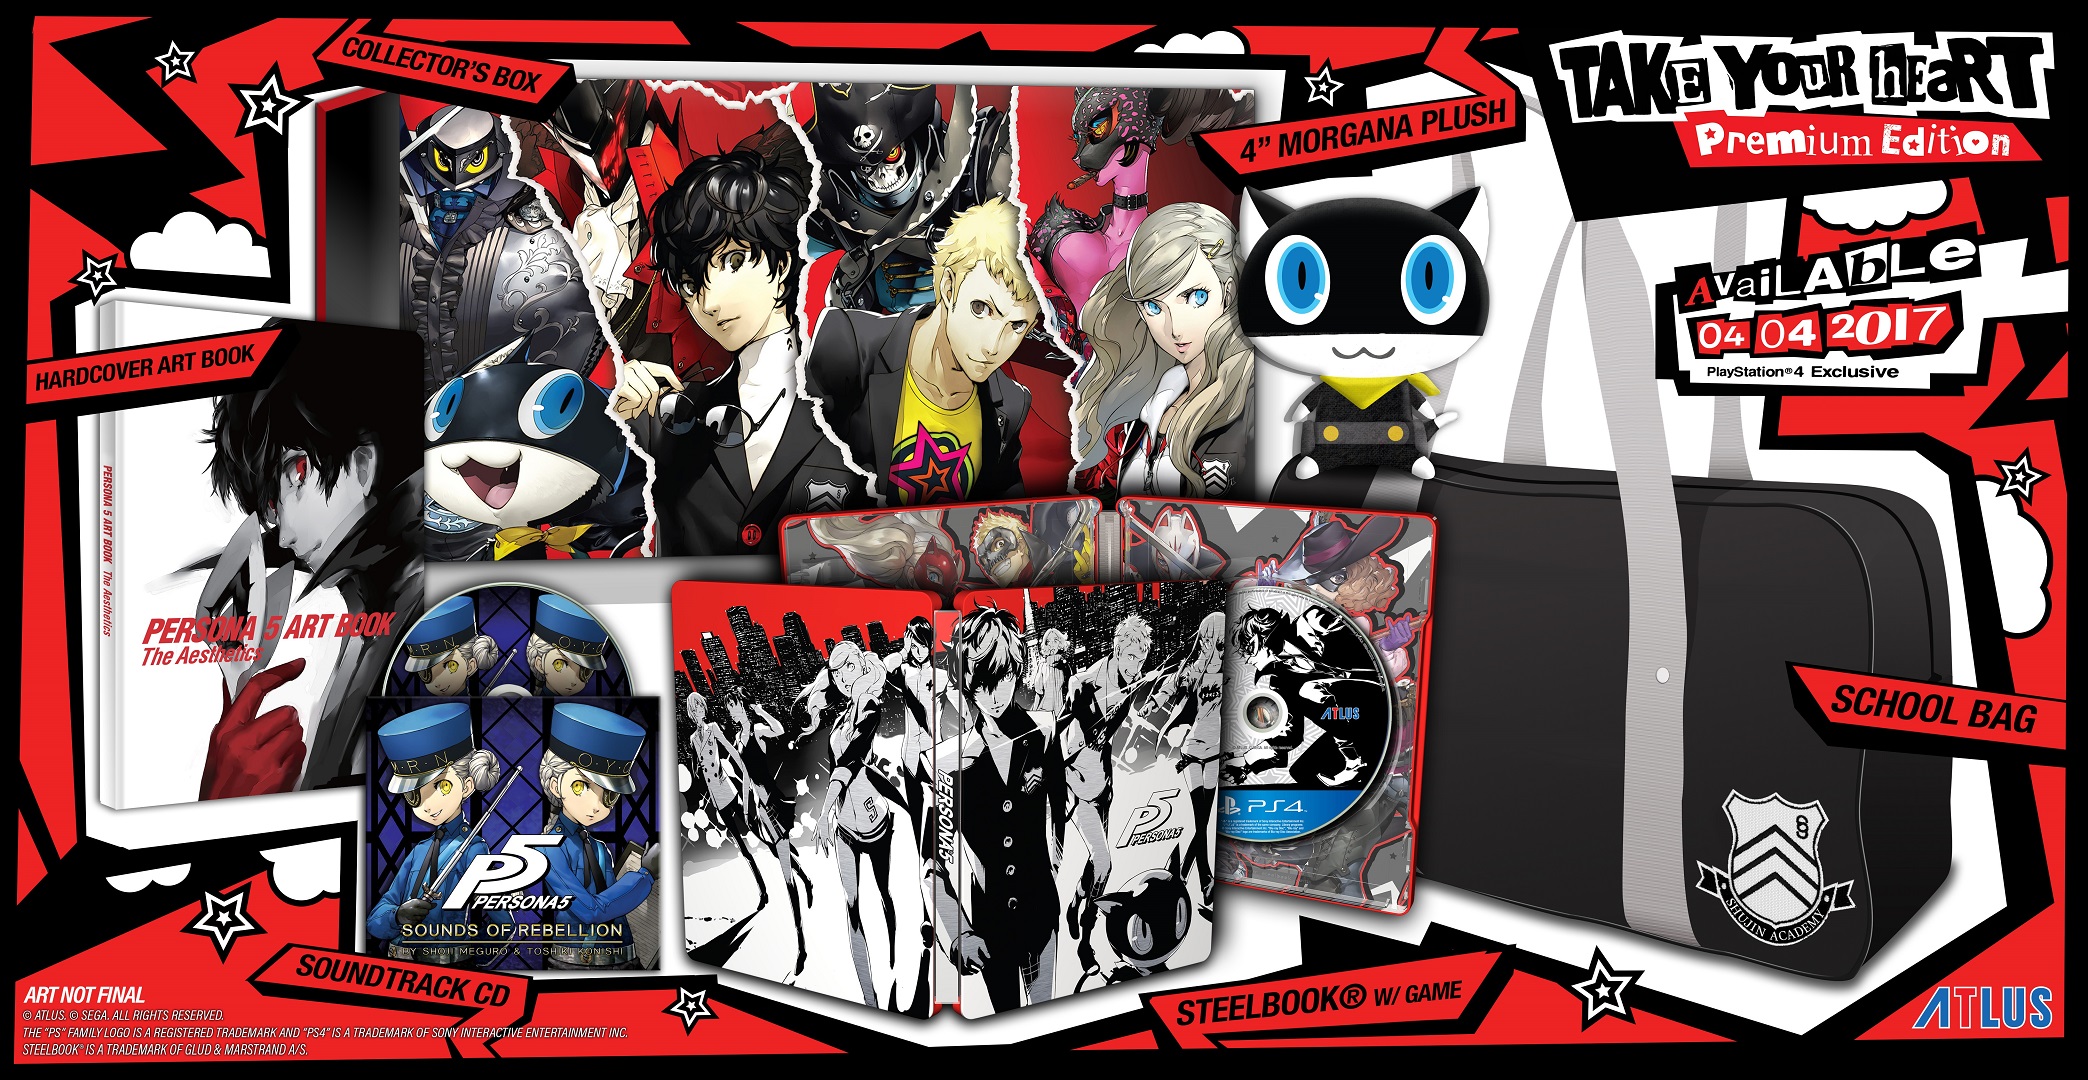 Watch Atlus Unbox the Persona 5 Take Your Heart Edition